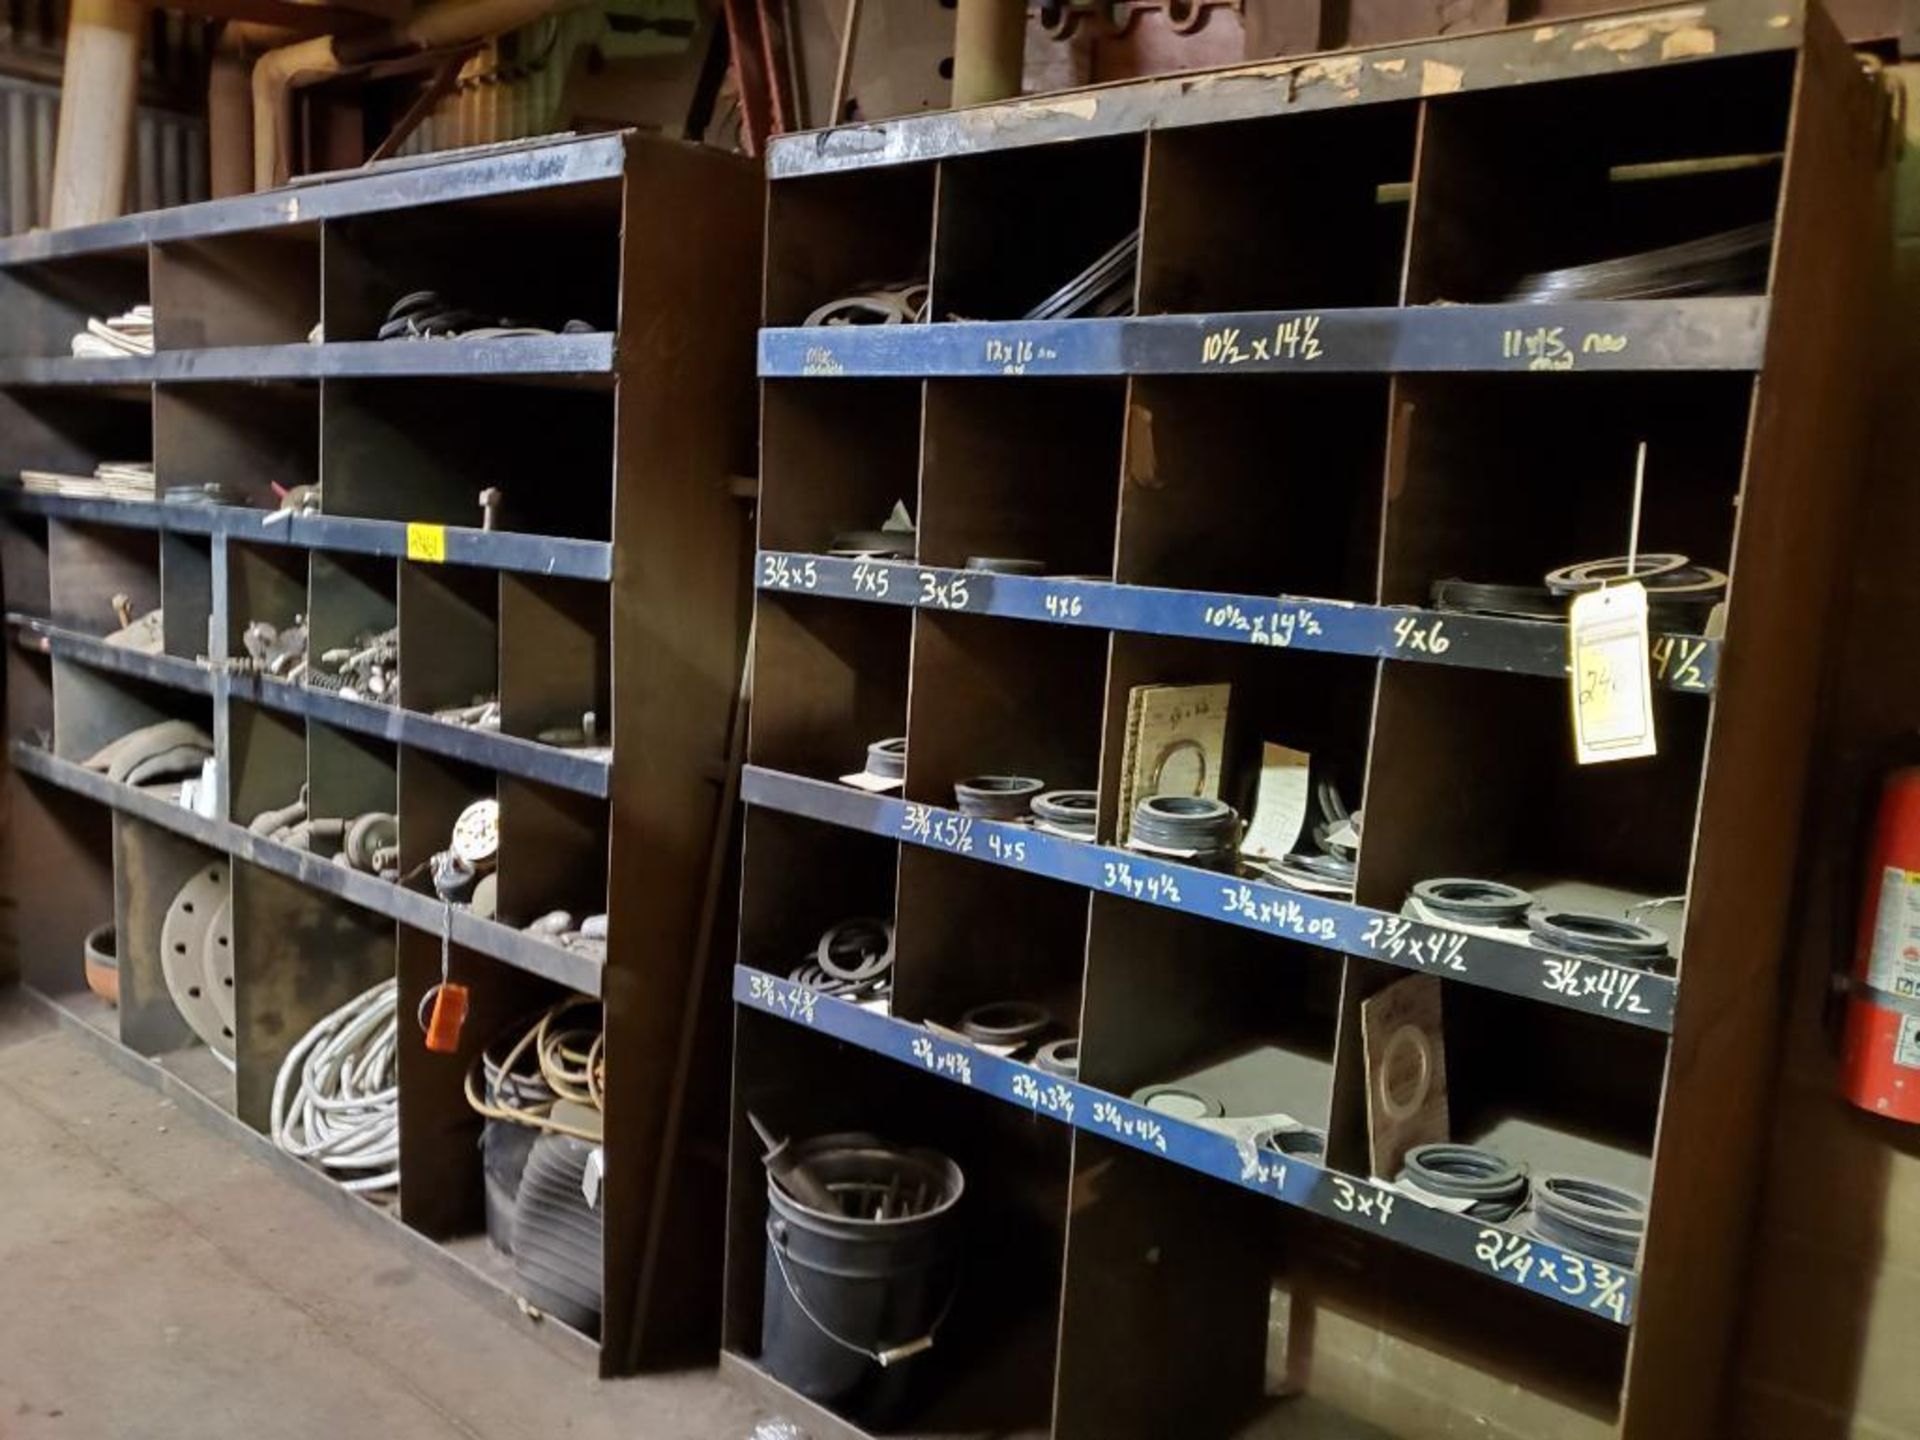 LARGE QUANTITY OF PIPE FITTINGS, FUSES, CHILL RINGS, PLANT SUPPORT AND SHELVING UNITS - Bild 13 aus 25